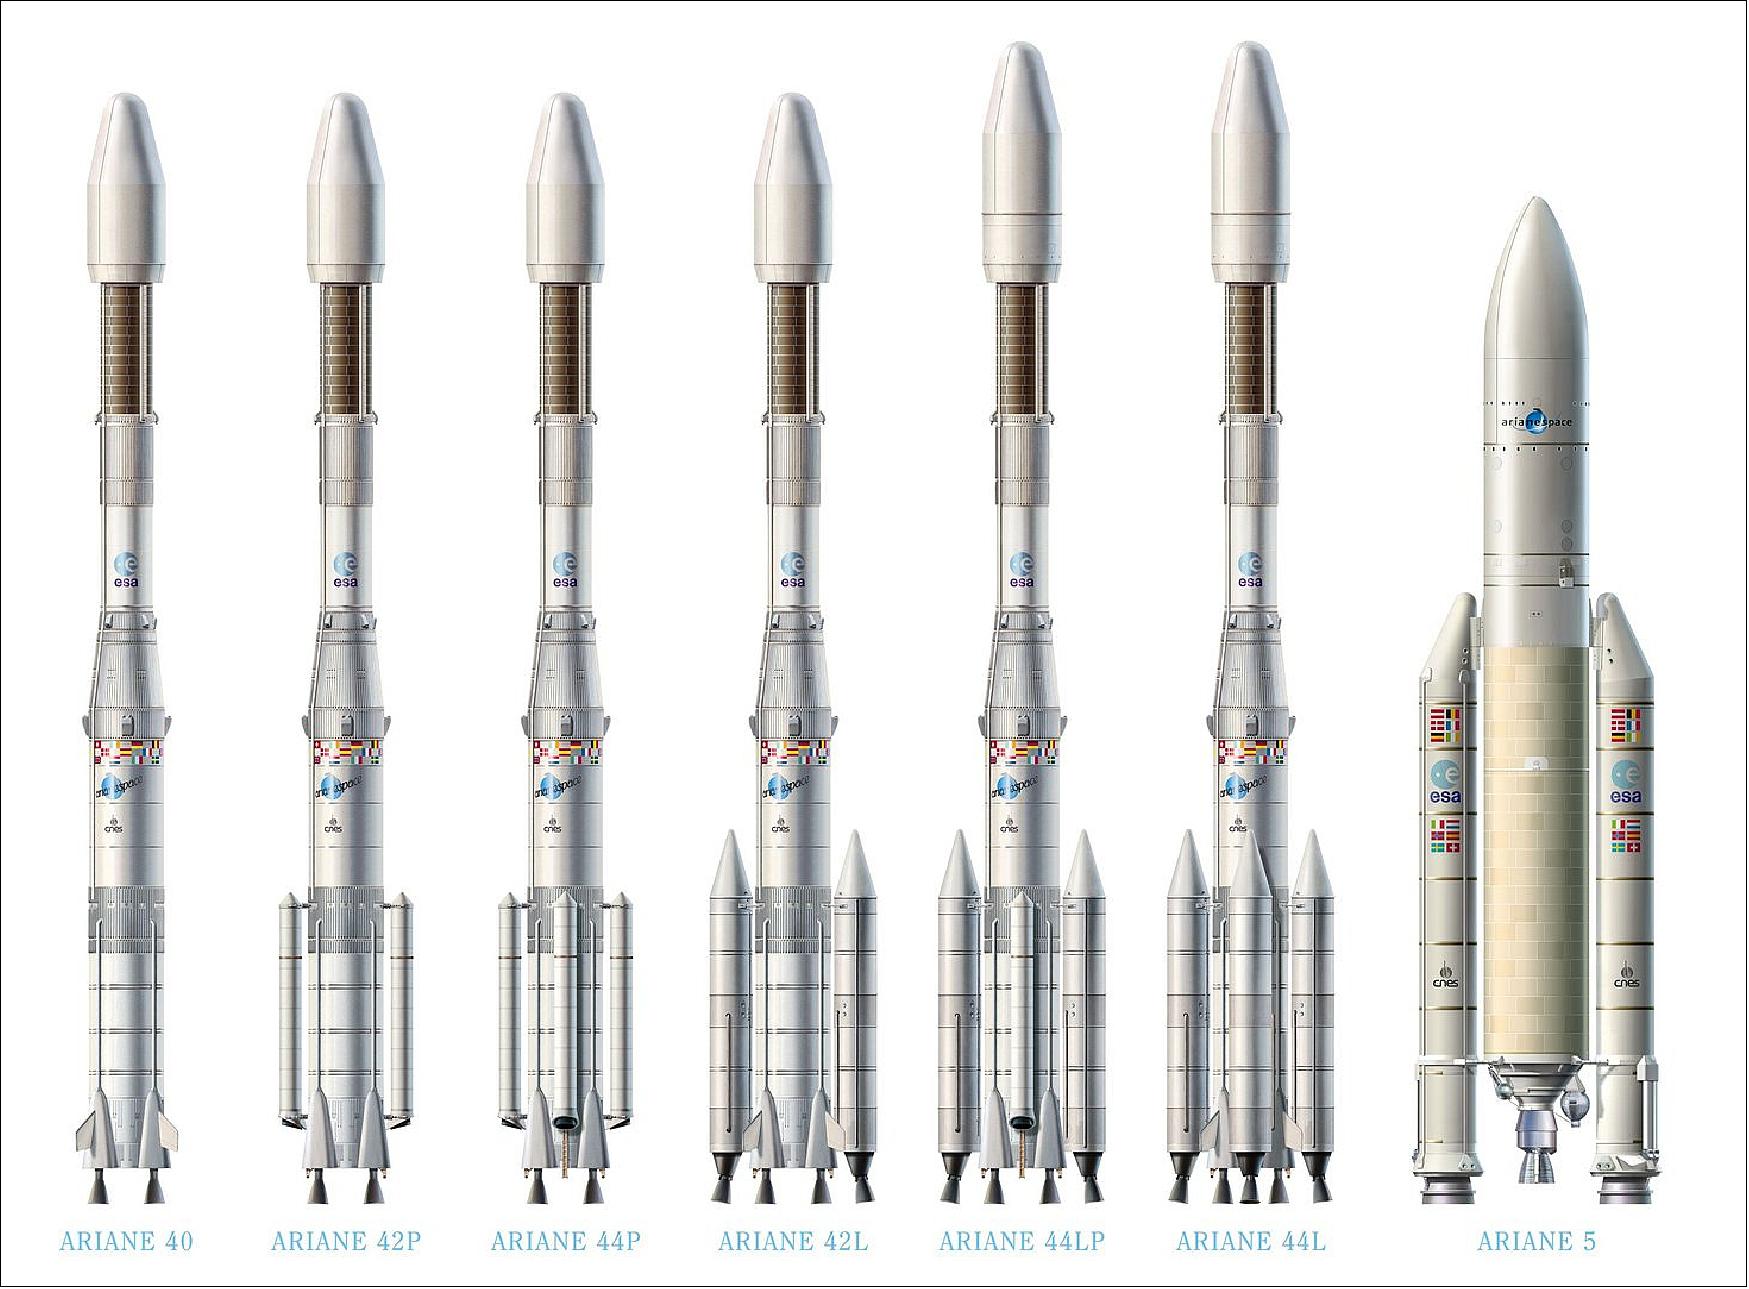 Figure 59: Artist's rendition of the Ariane 4 and Ariane 5 launchers (image credit: ESA, D. Ducros)